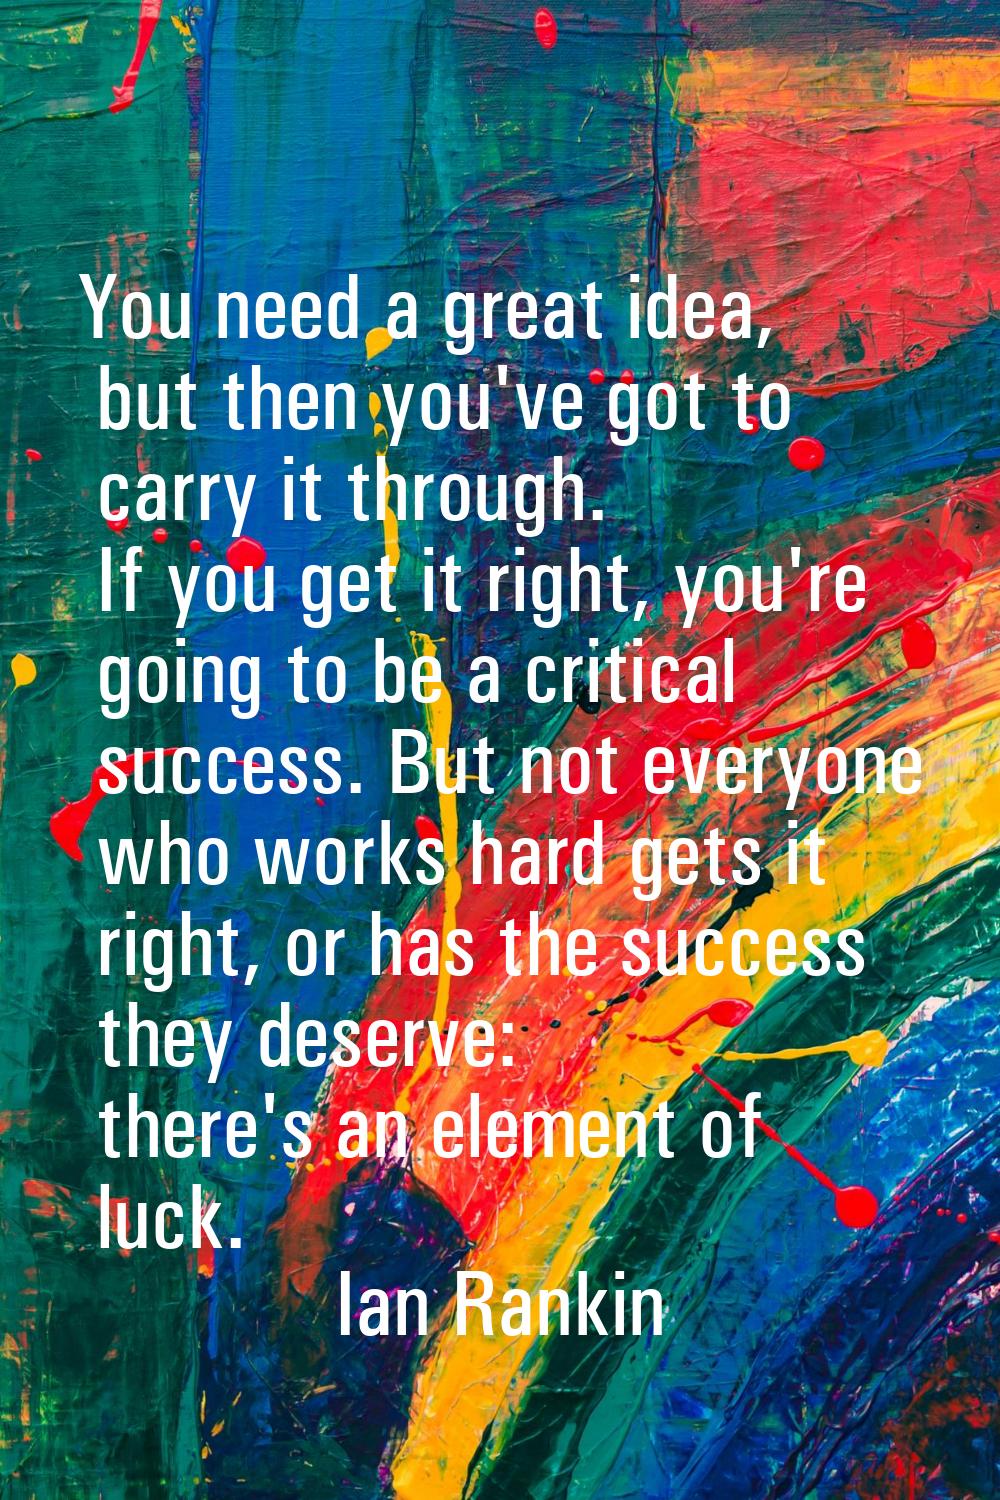 You need a great idea, but then you've got to carry it through. If you get it right, you're going t